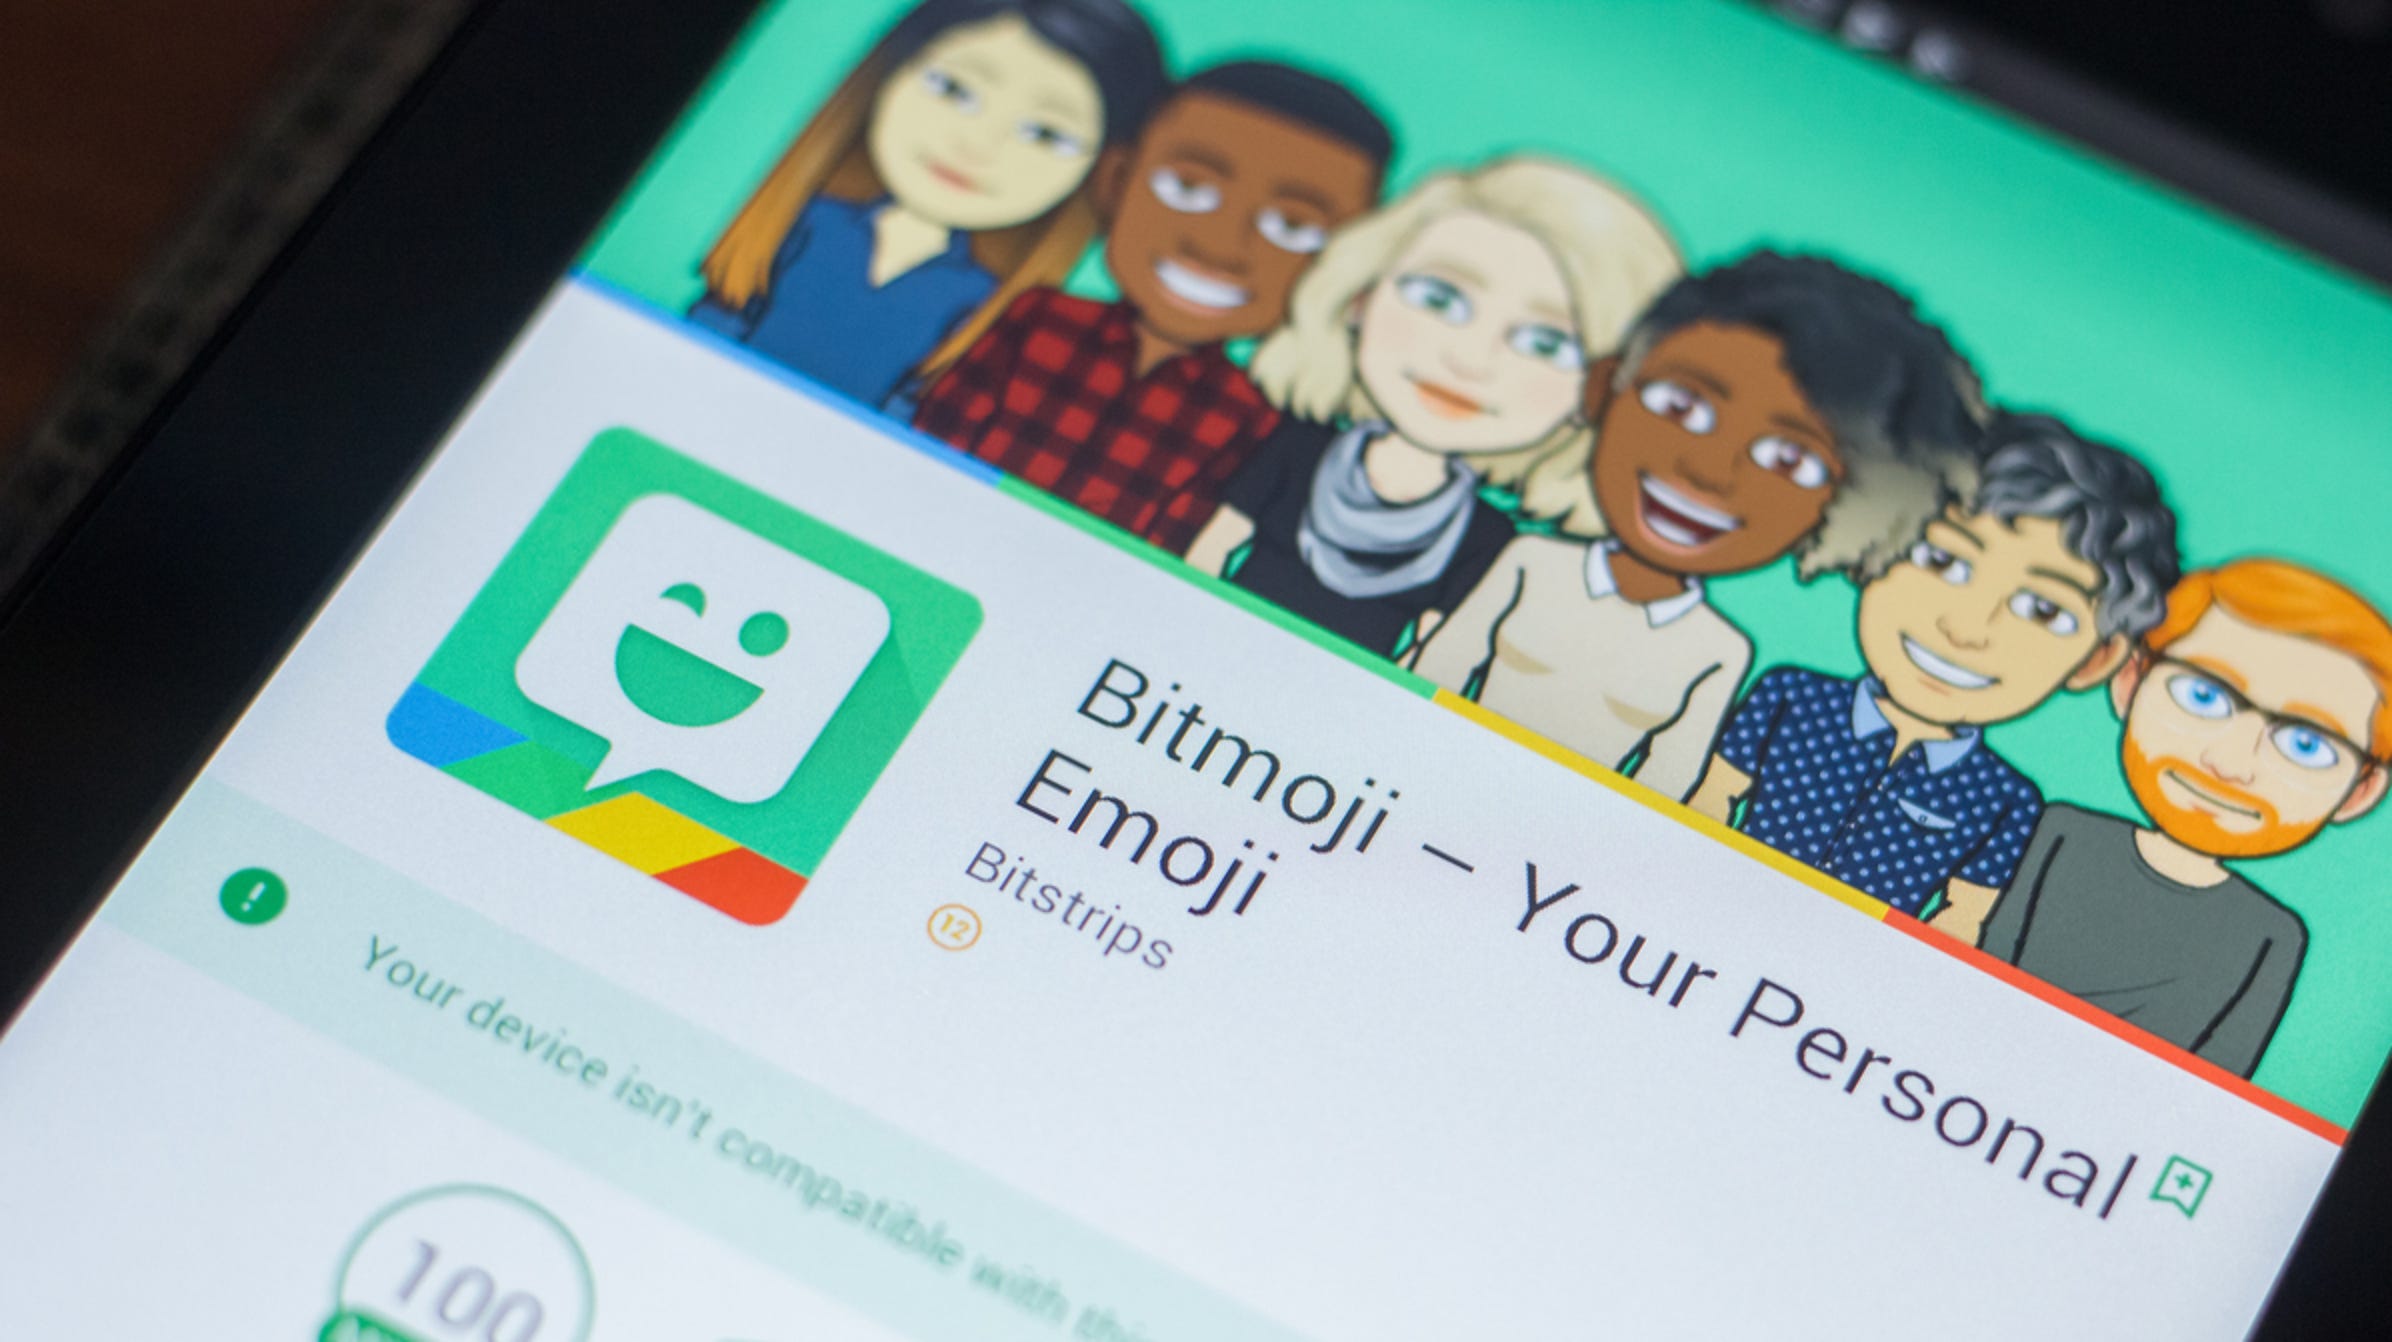 What Is Bitmoji, and Where Can You Use It?